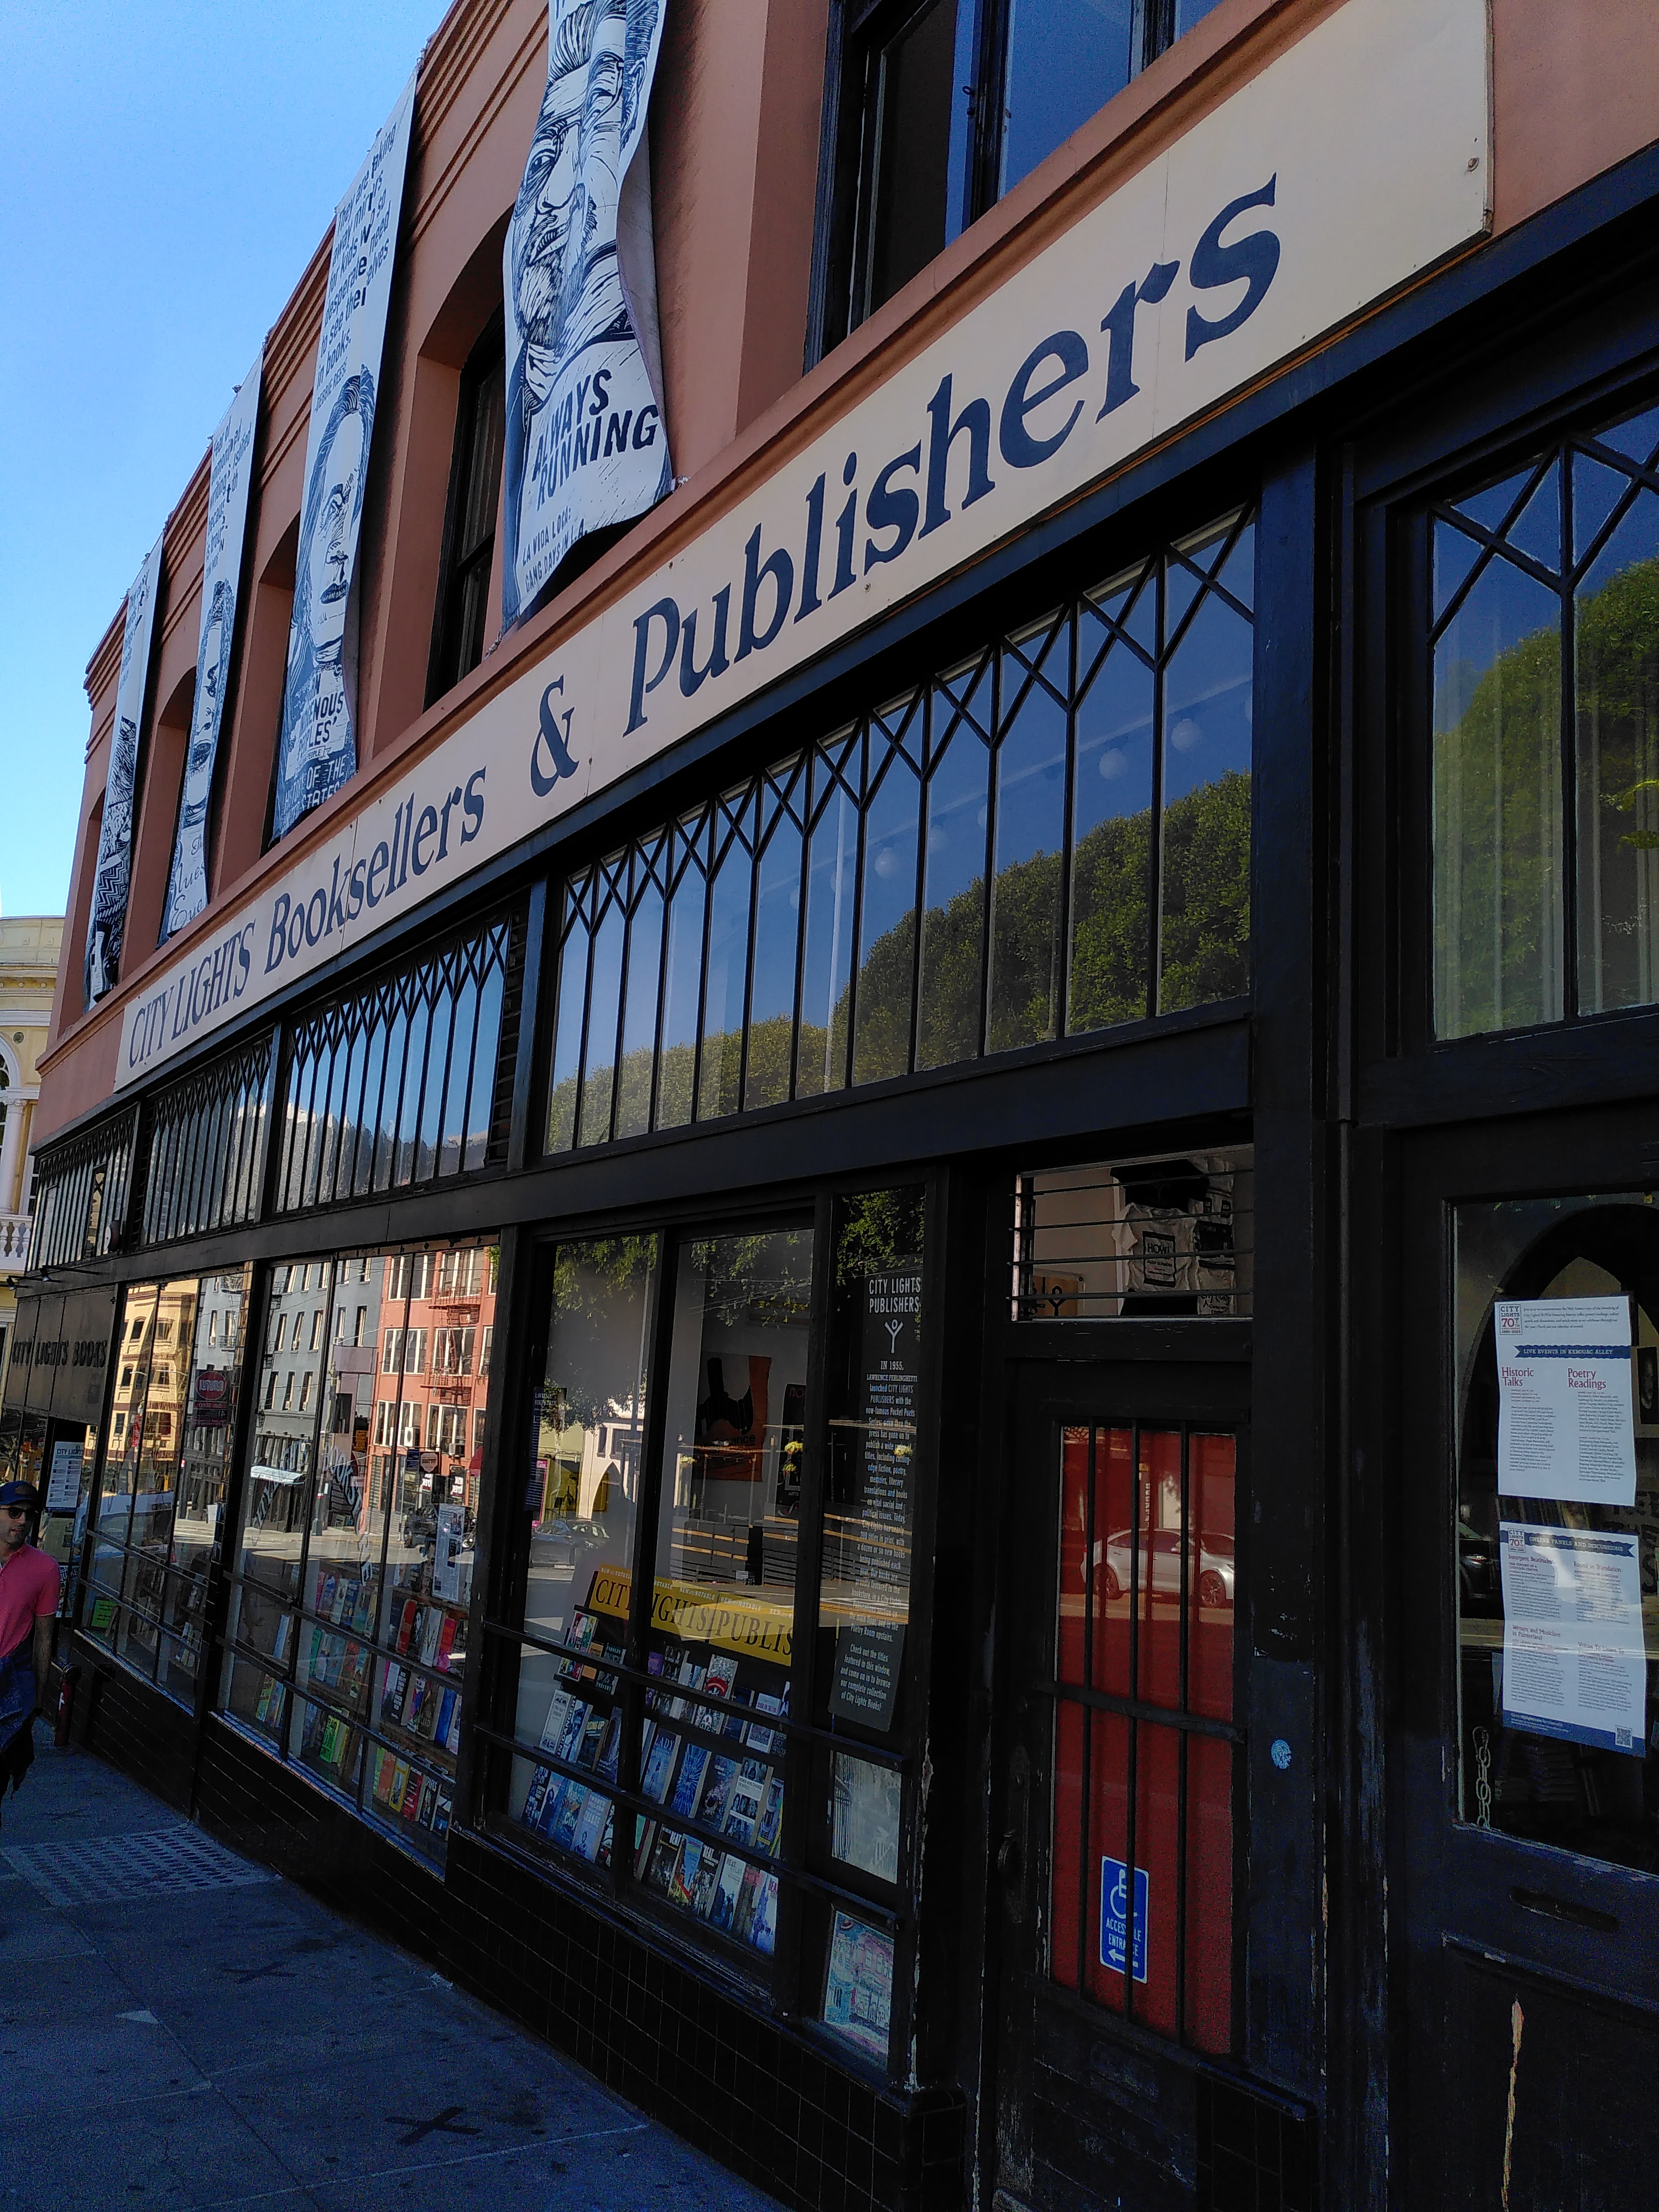 A building with a sign saying "City Lights Booksellers & publishers".